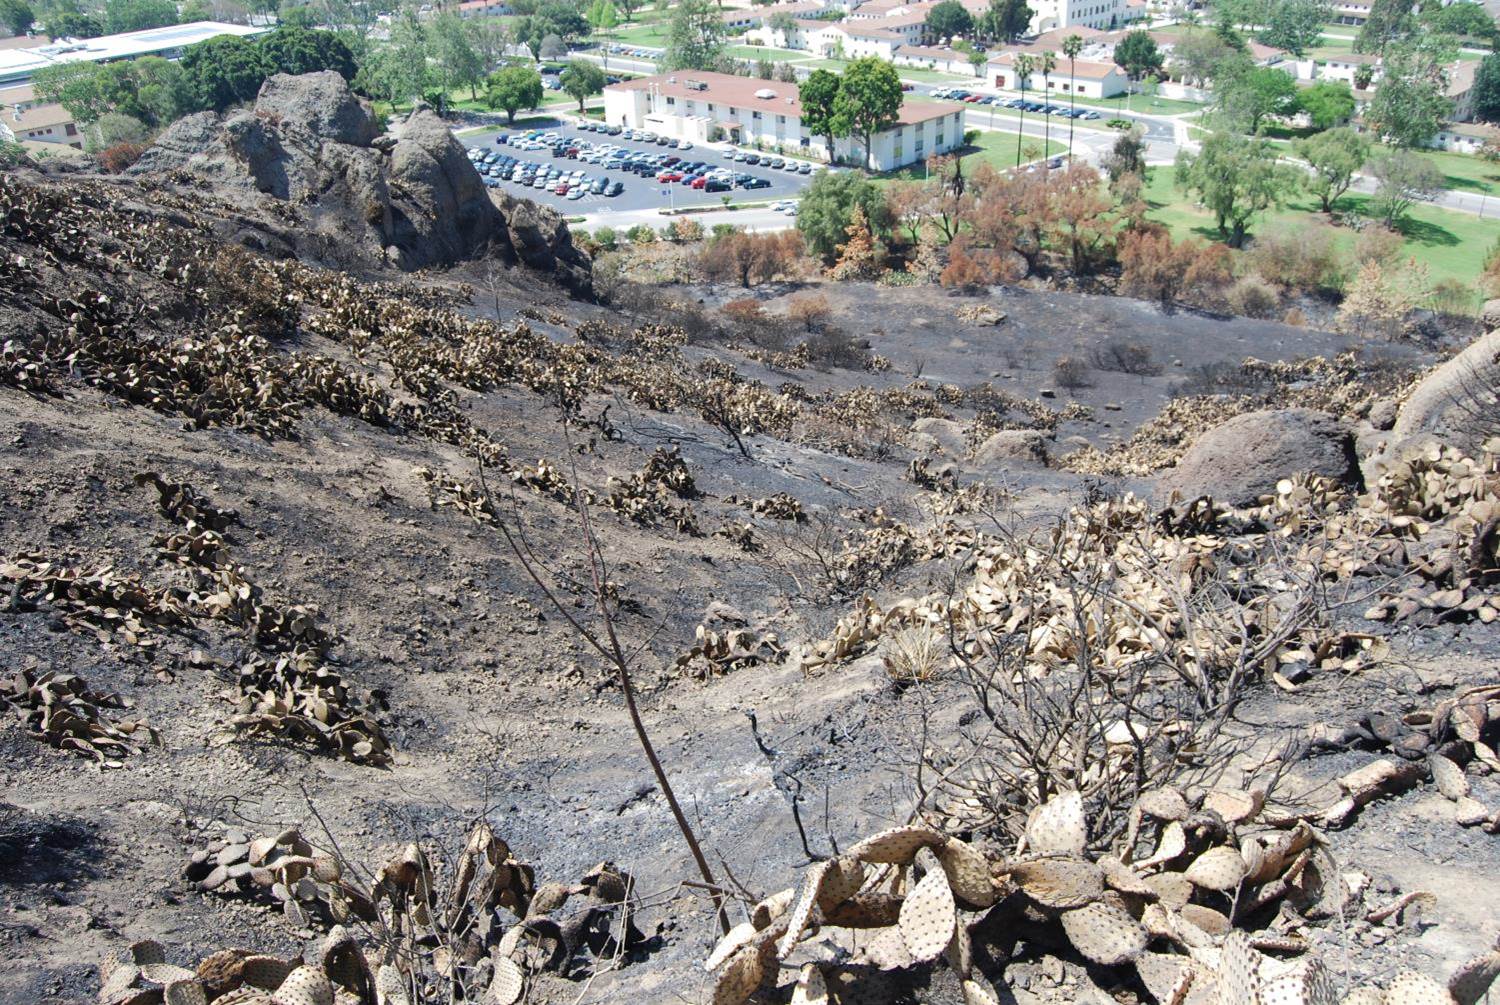 View from mountain after a fire with burnt cactus and plants with CSUCI buildings seen from a far